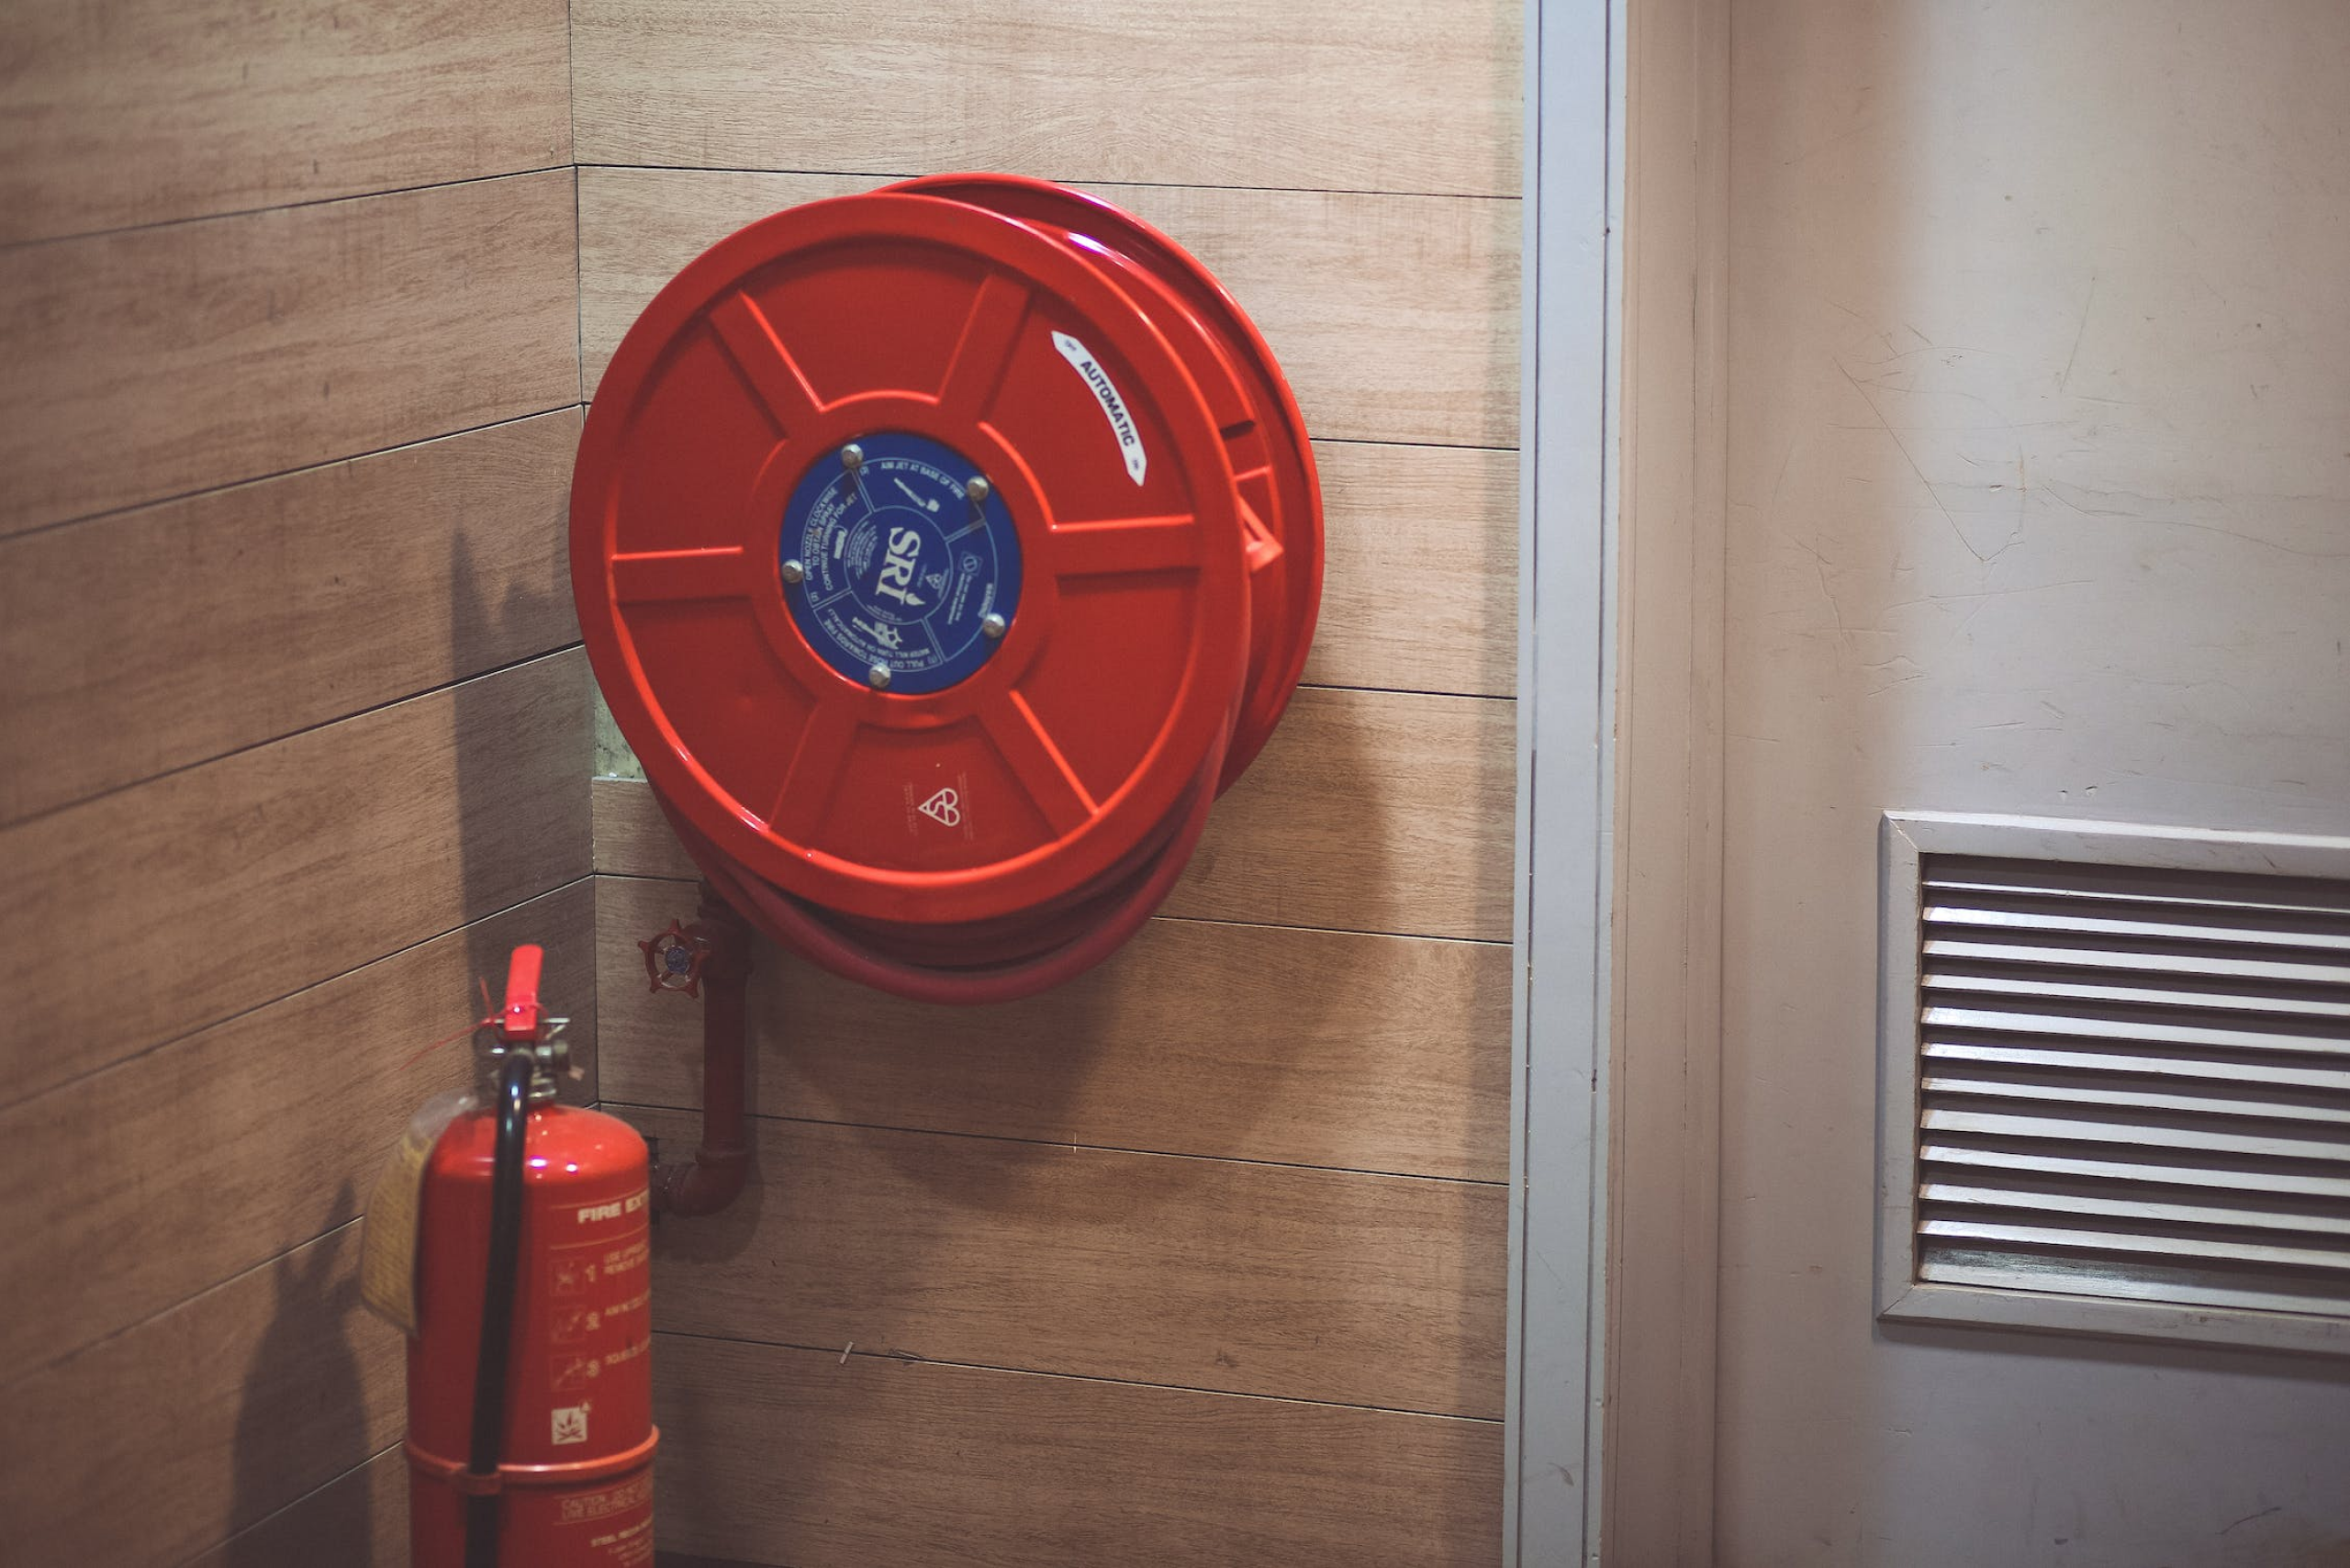 Fire hose real and fire extinguisher.